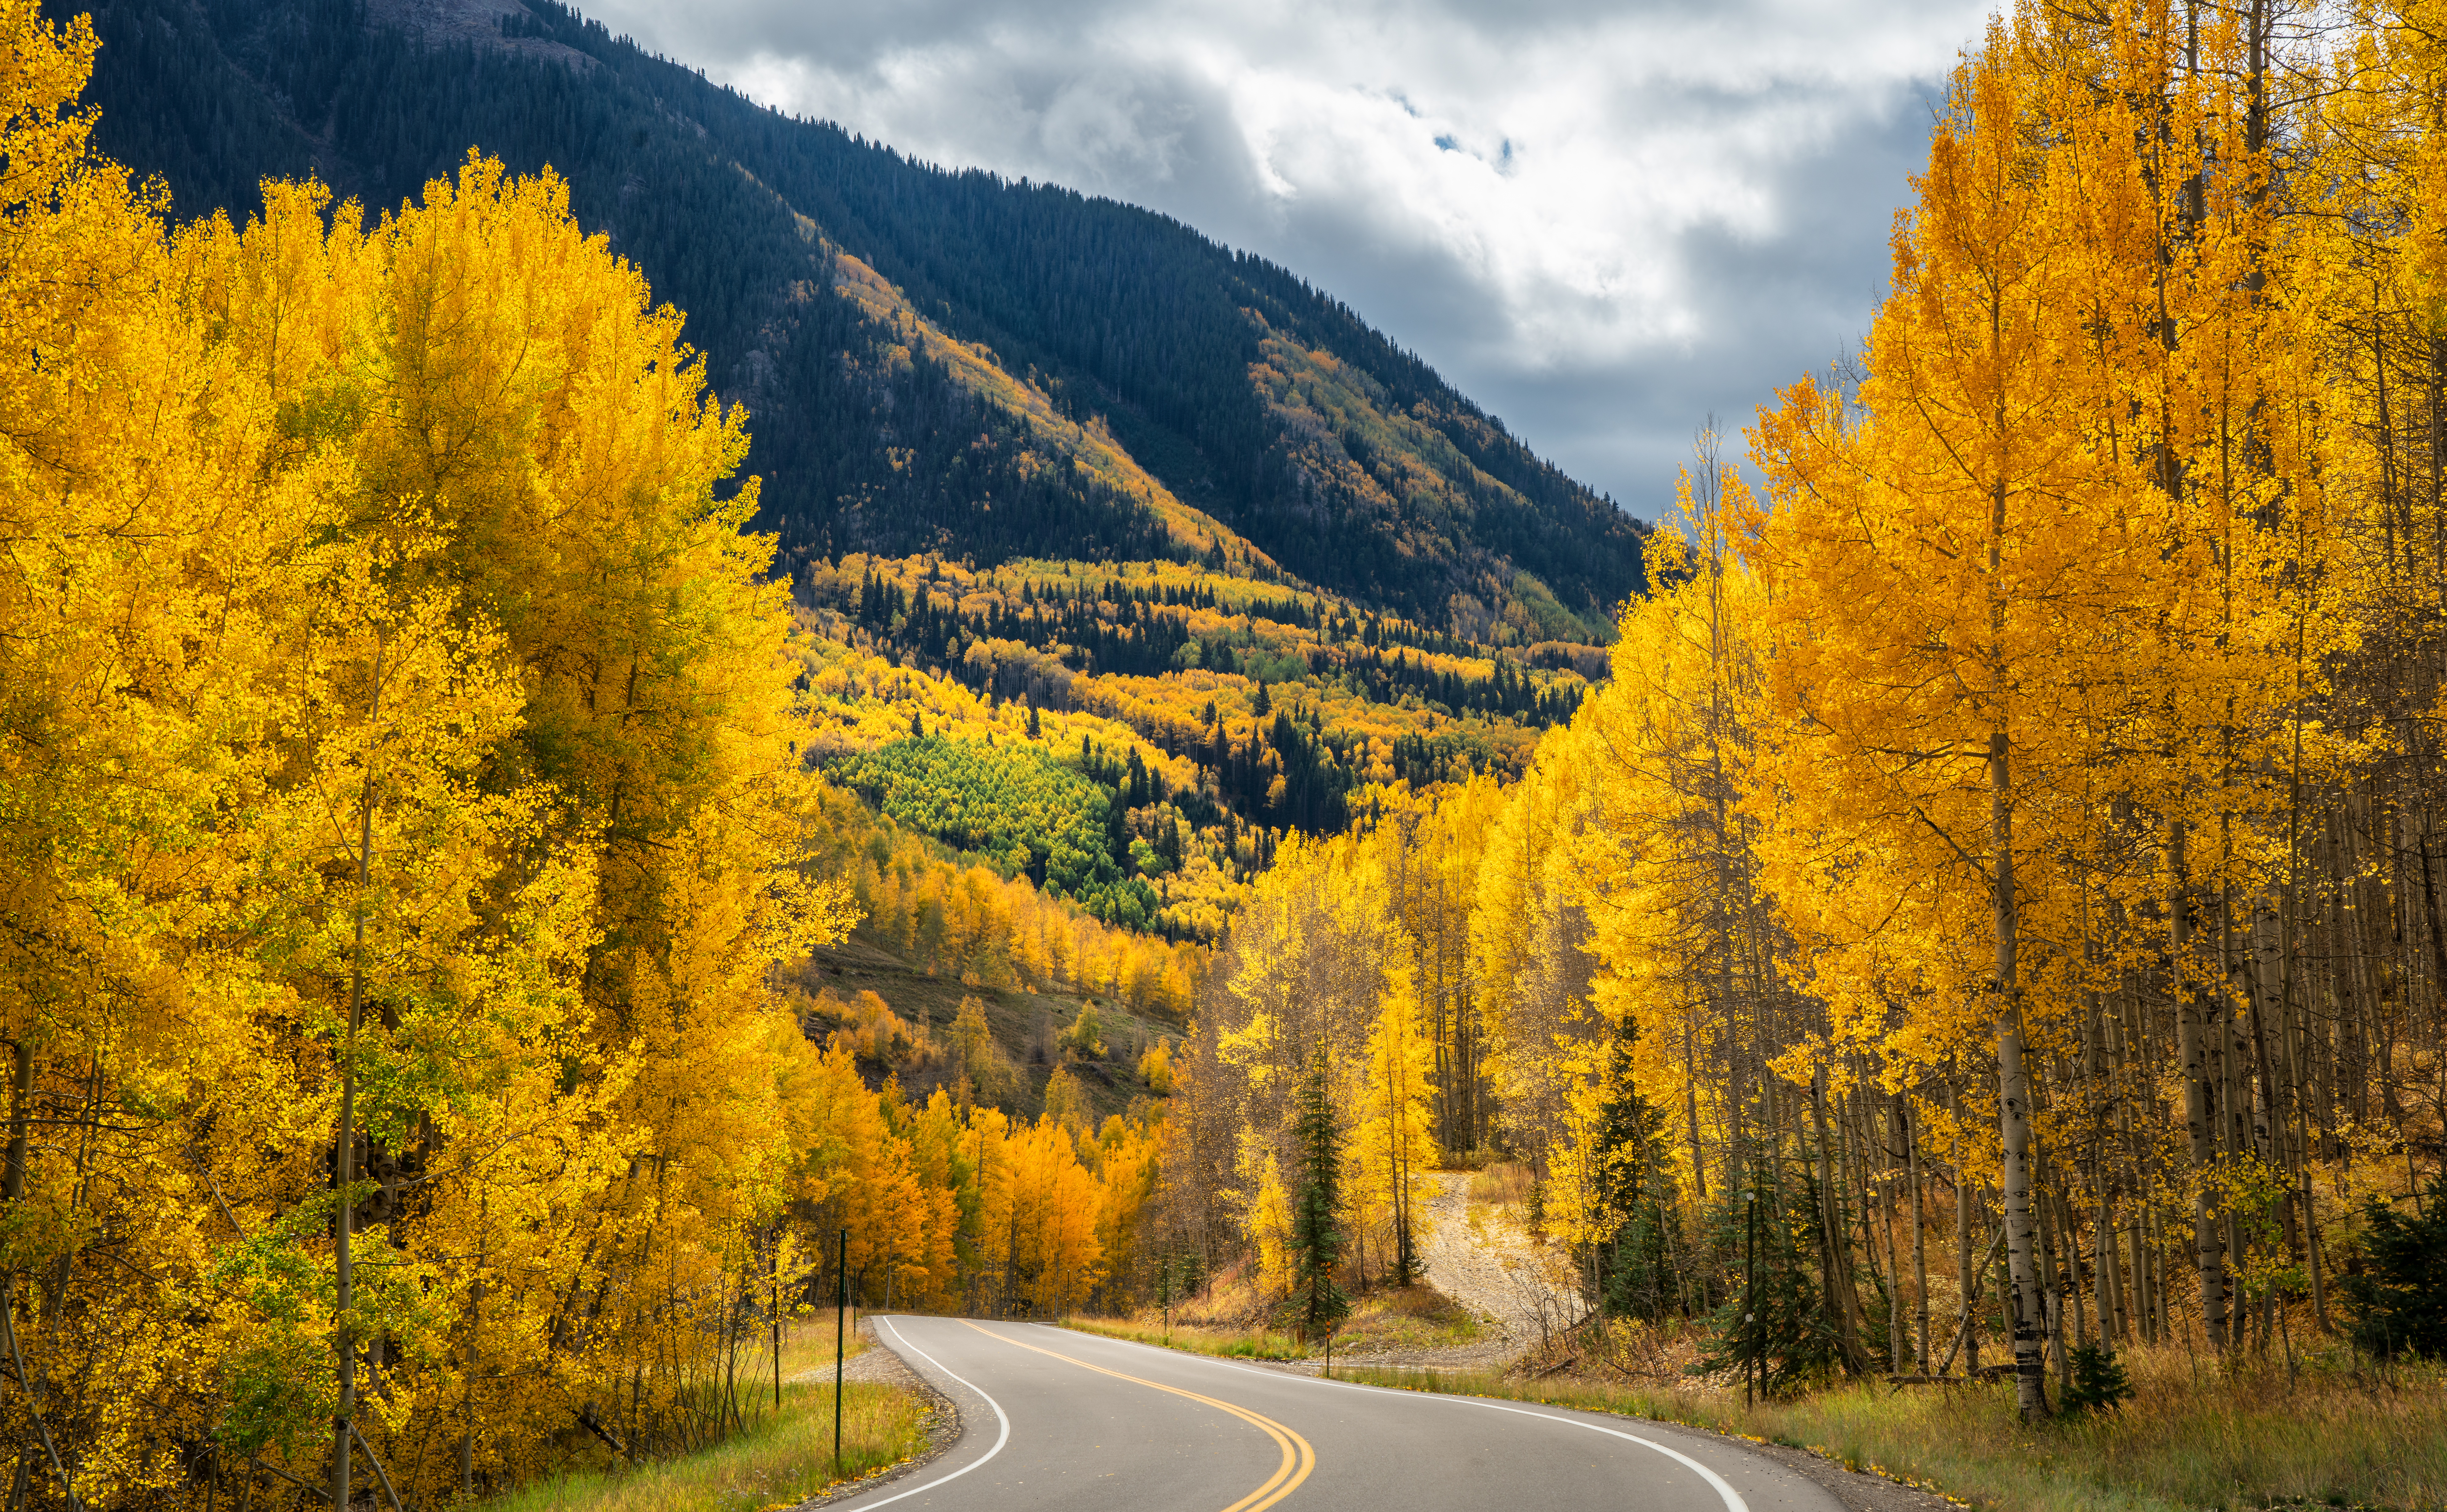 Autumn views between Telluride and Delores Highway 145